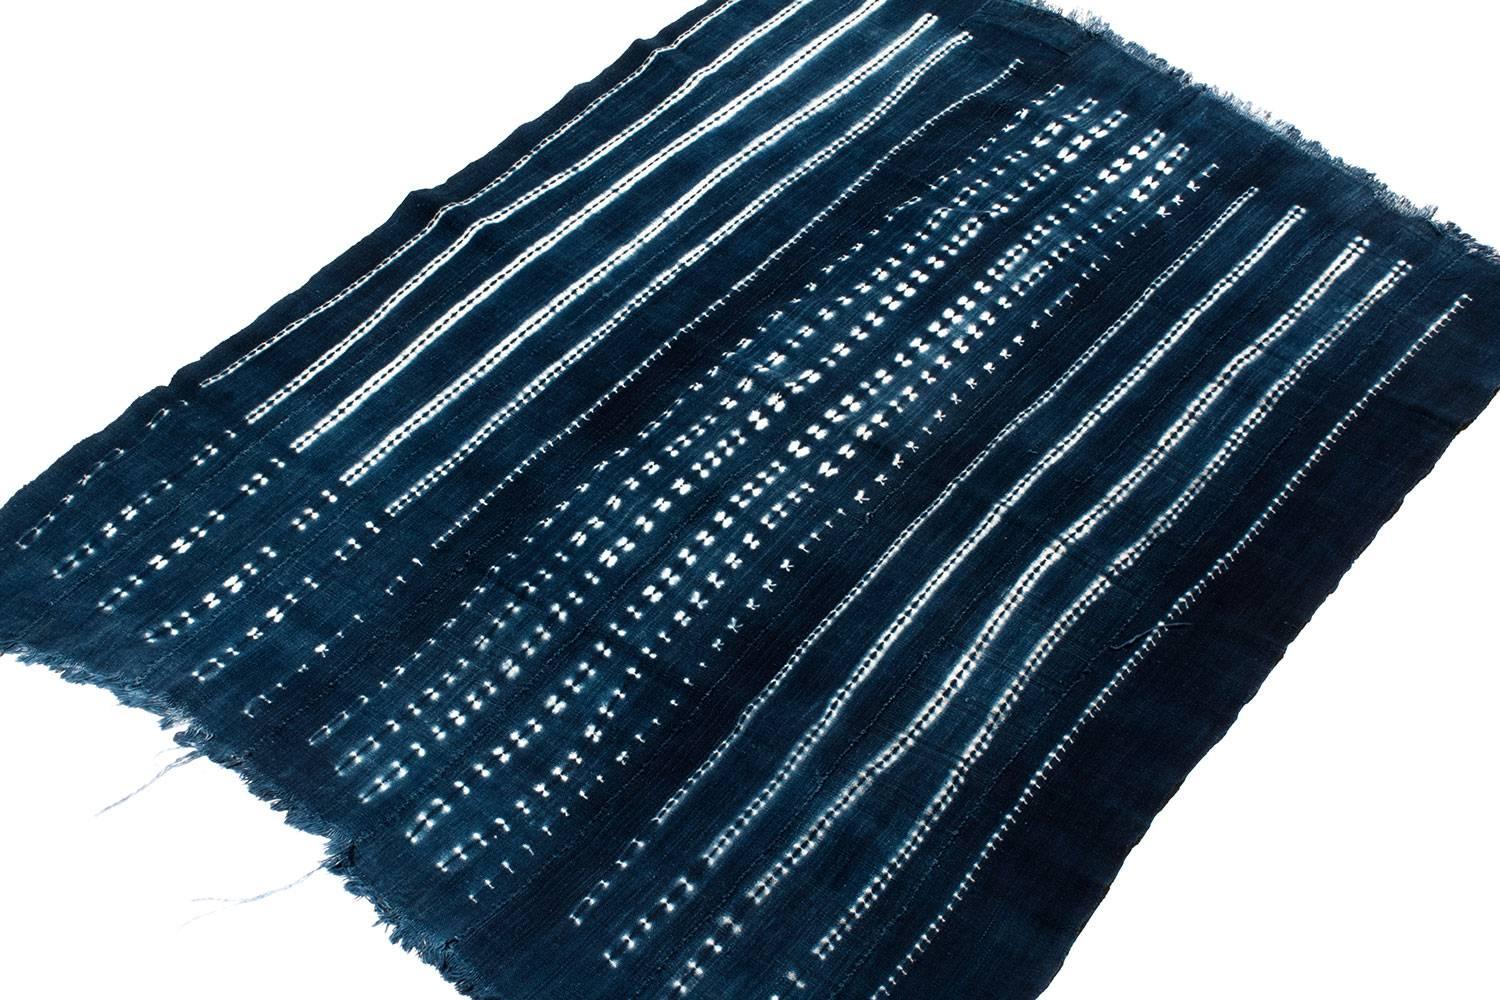 This vintage textile is woven from hand-spun African cotton and dyed with Indigo. The patten is a Indigo dye resist technique. Very soft Cotton and Luminous dye.